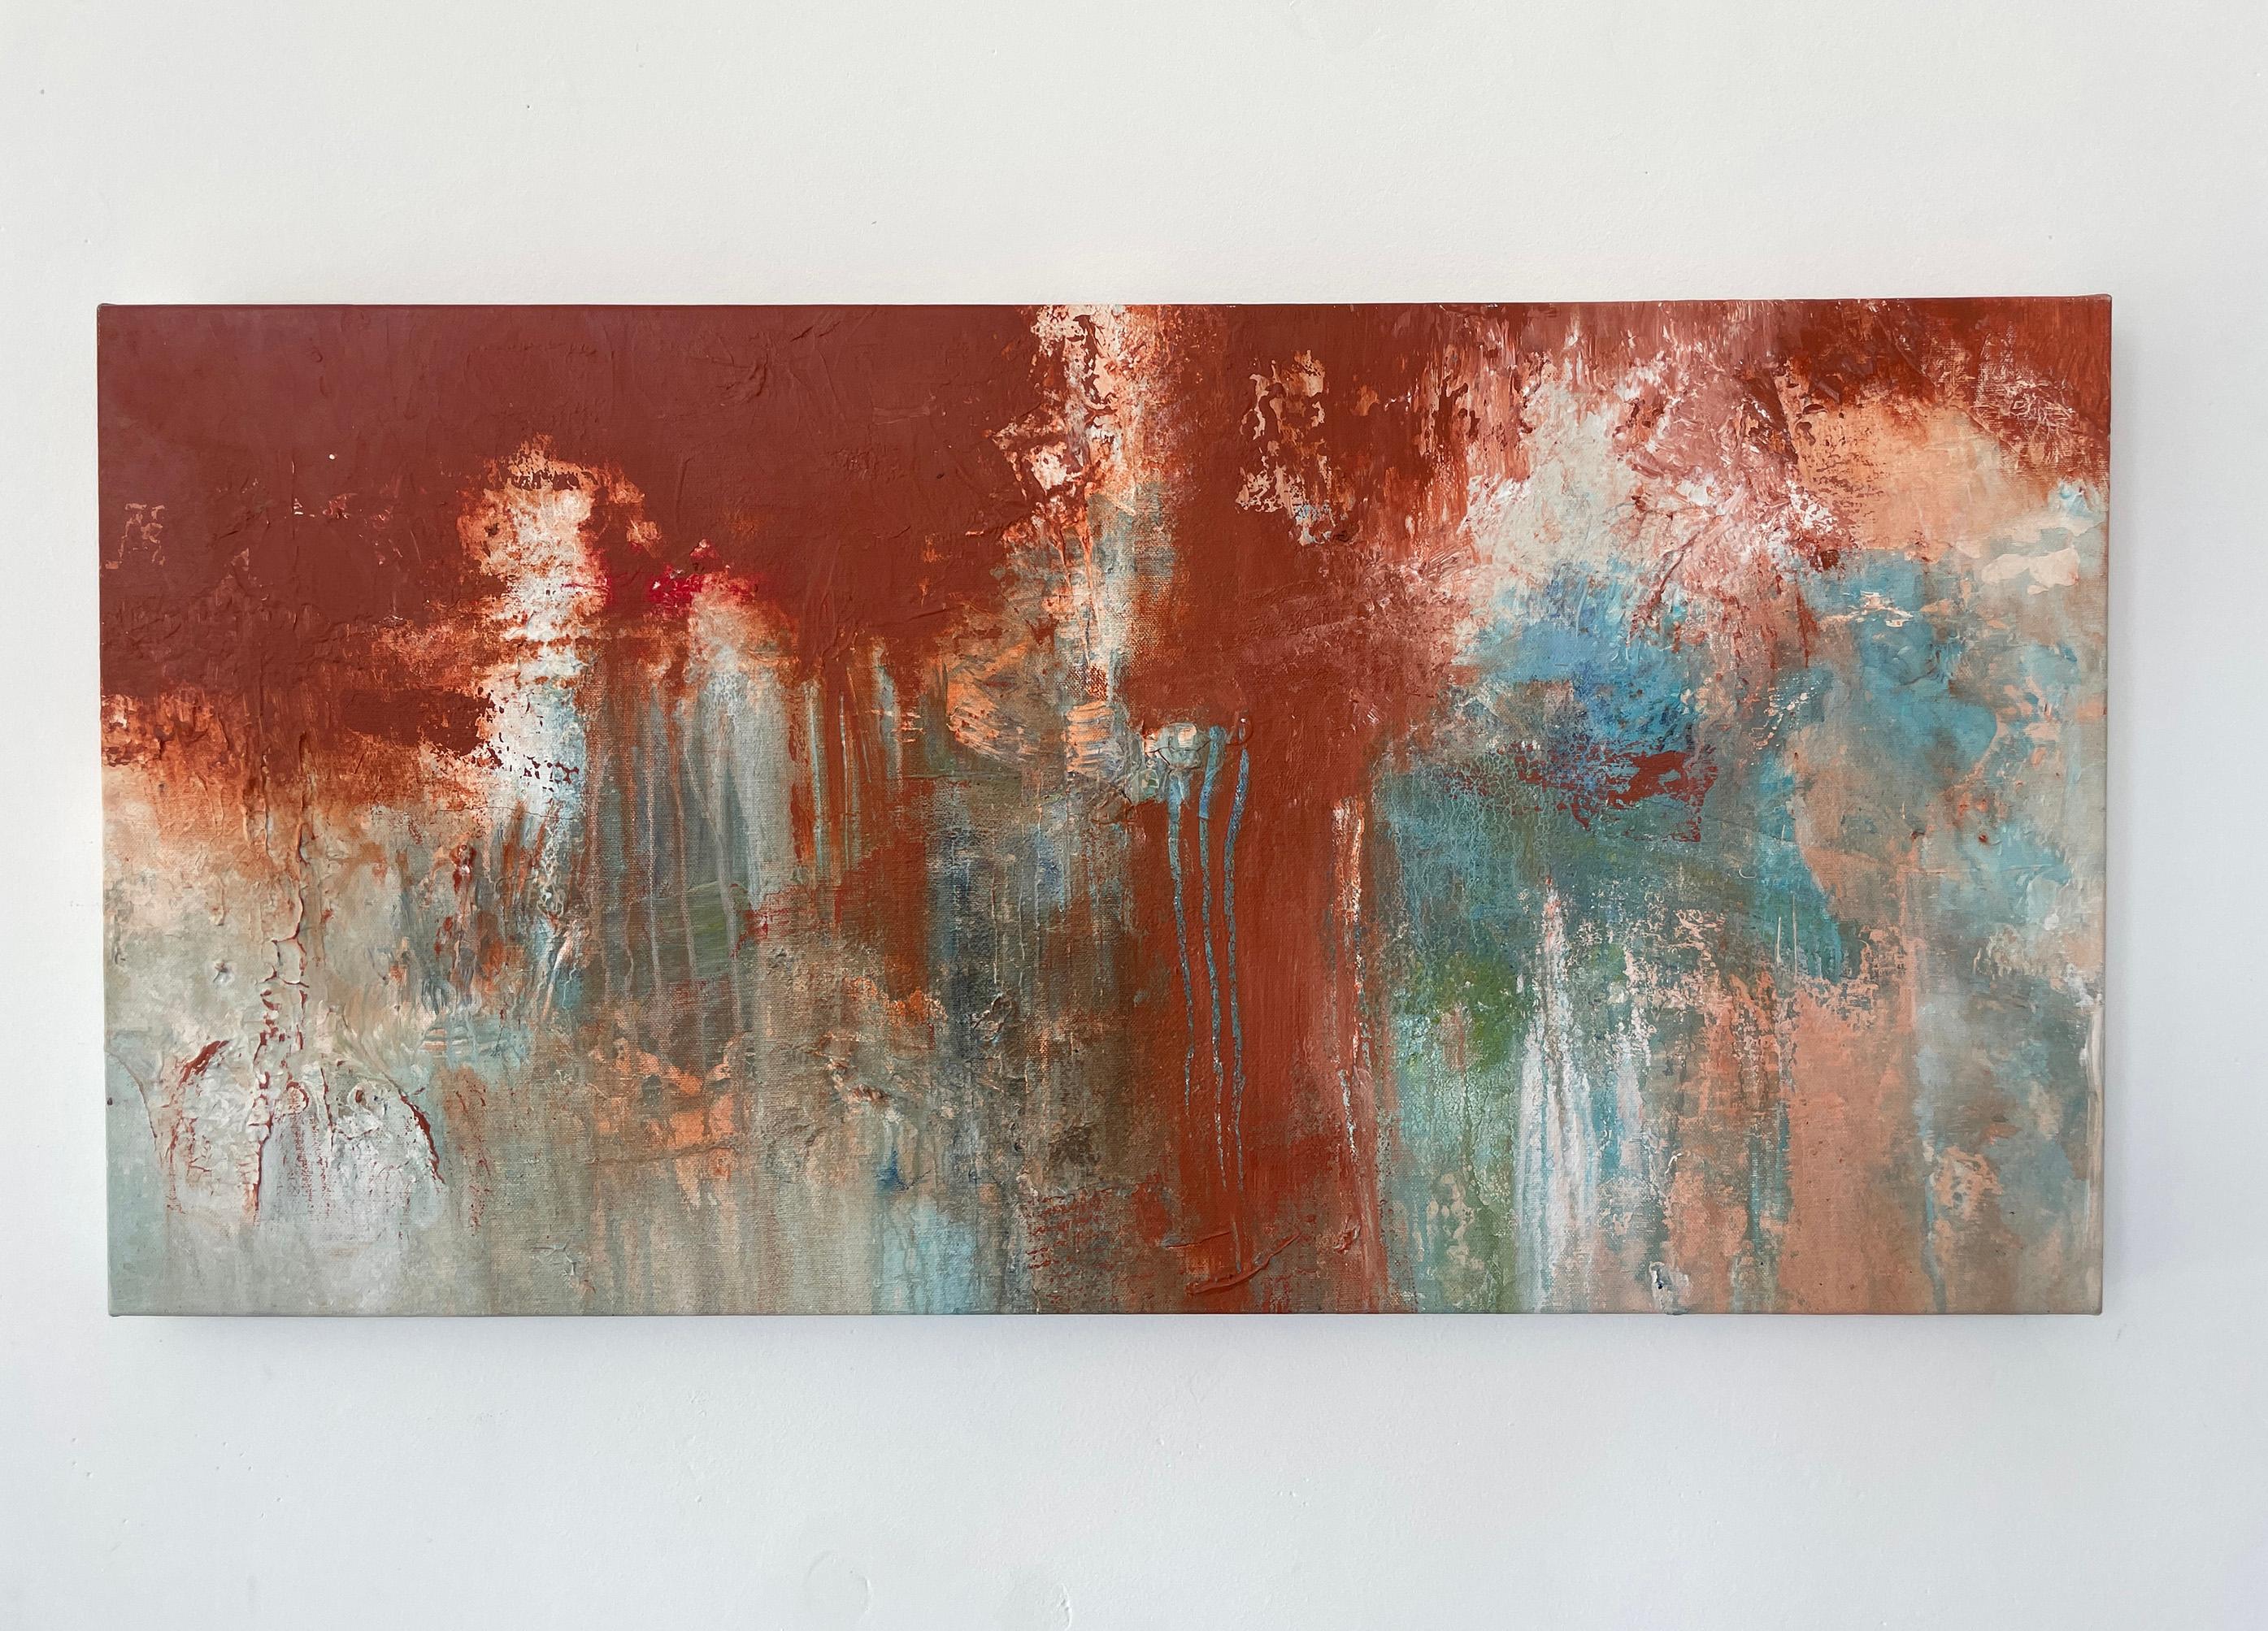 Water and Light, Untitled #4- acrylic on canvas - Painting by Stephanie Visser 